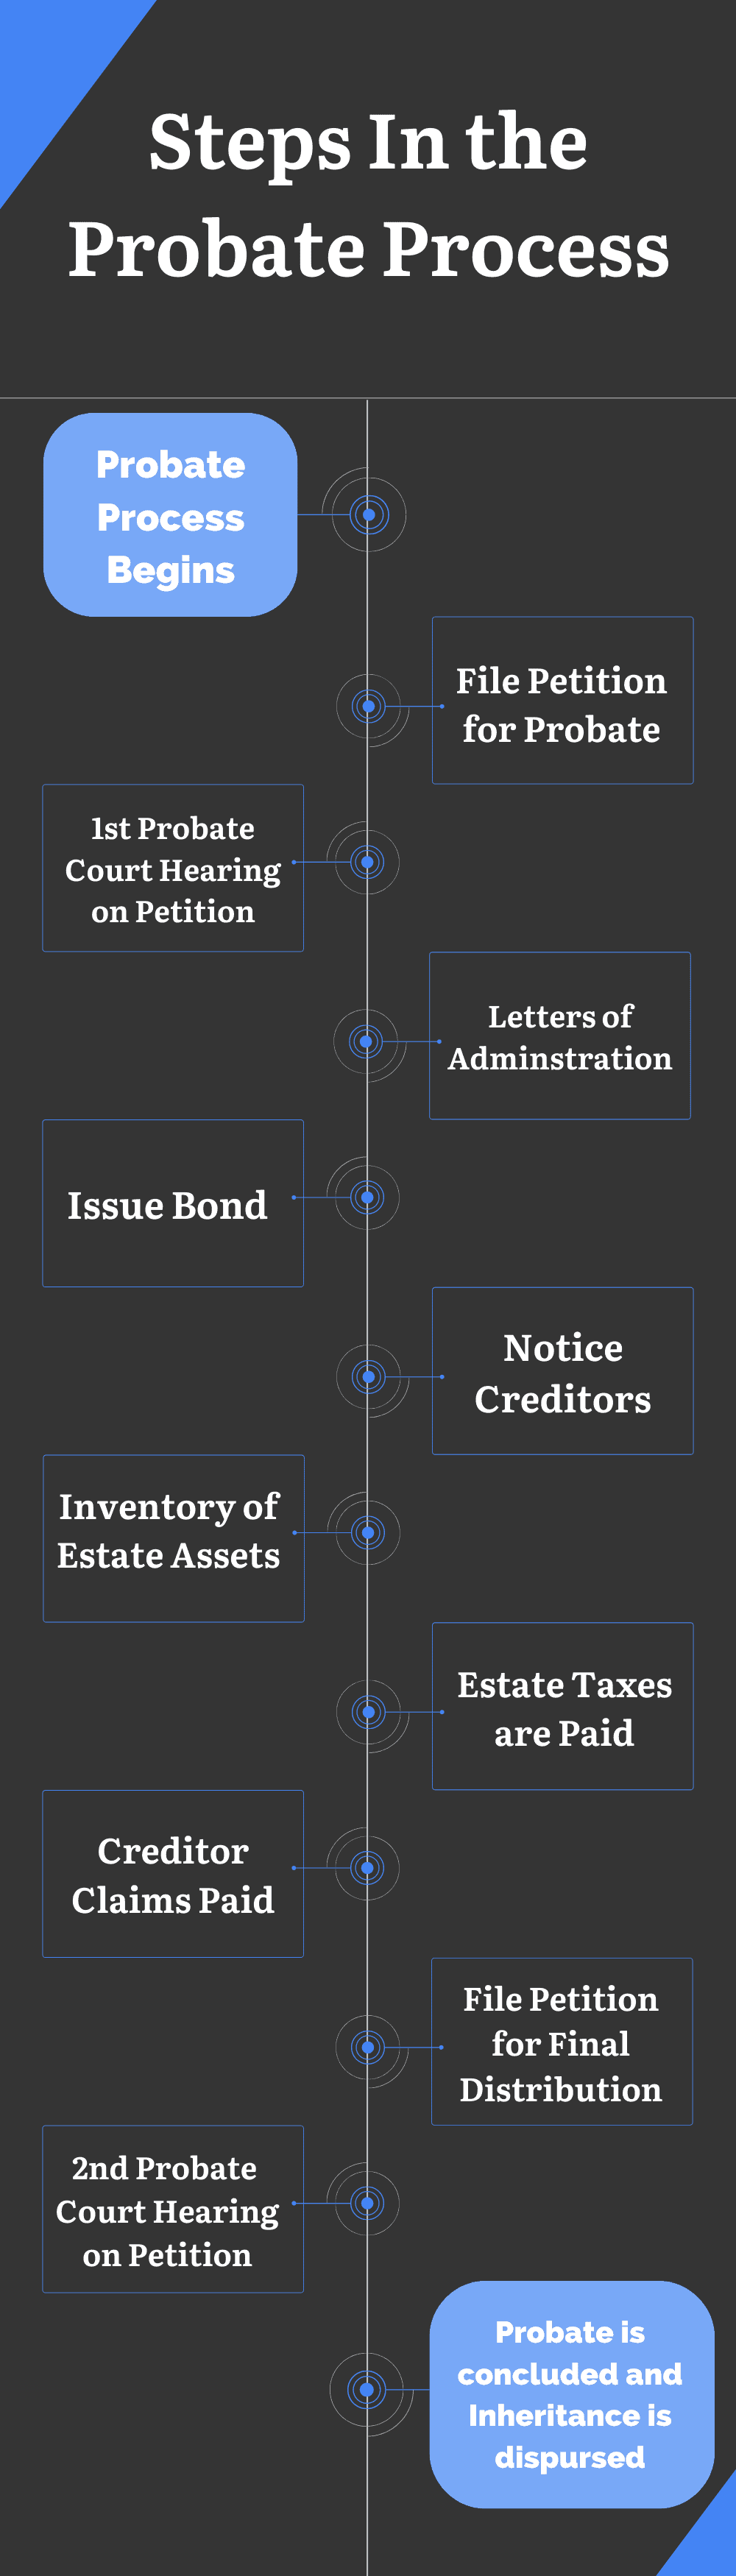 Steps In The Probate Process Infographic